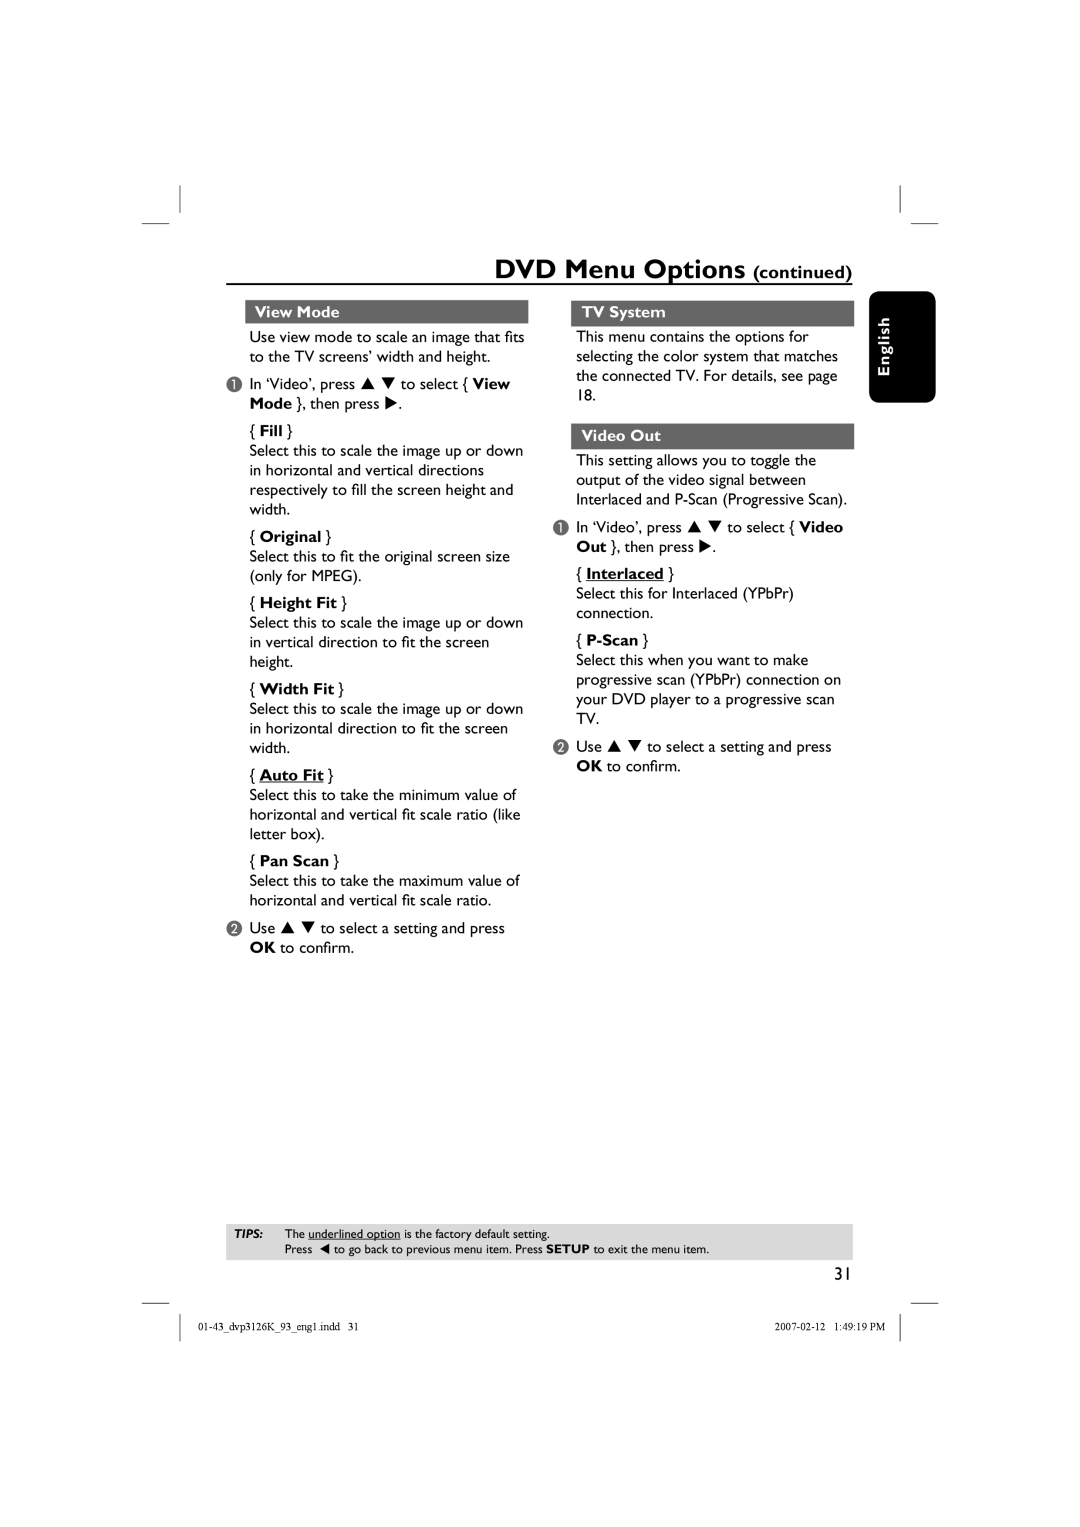 Philips DVP3126K/93 user manual View Mode TV System, Video Out 